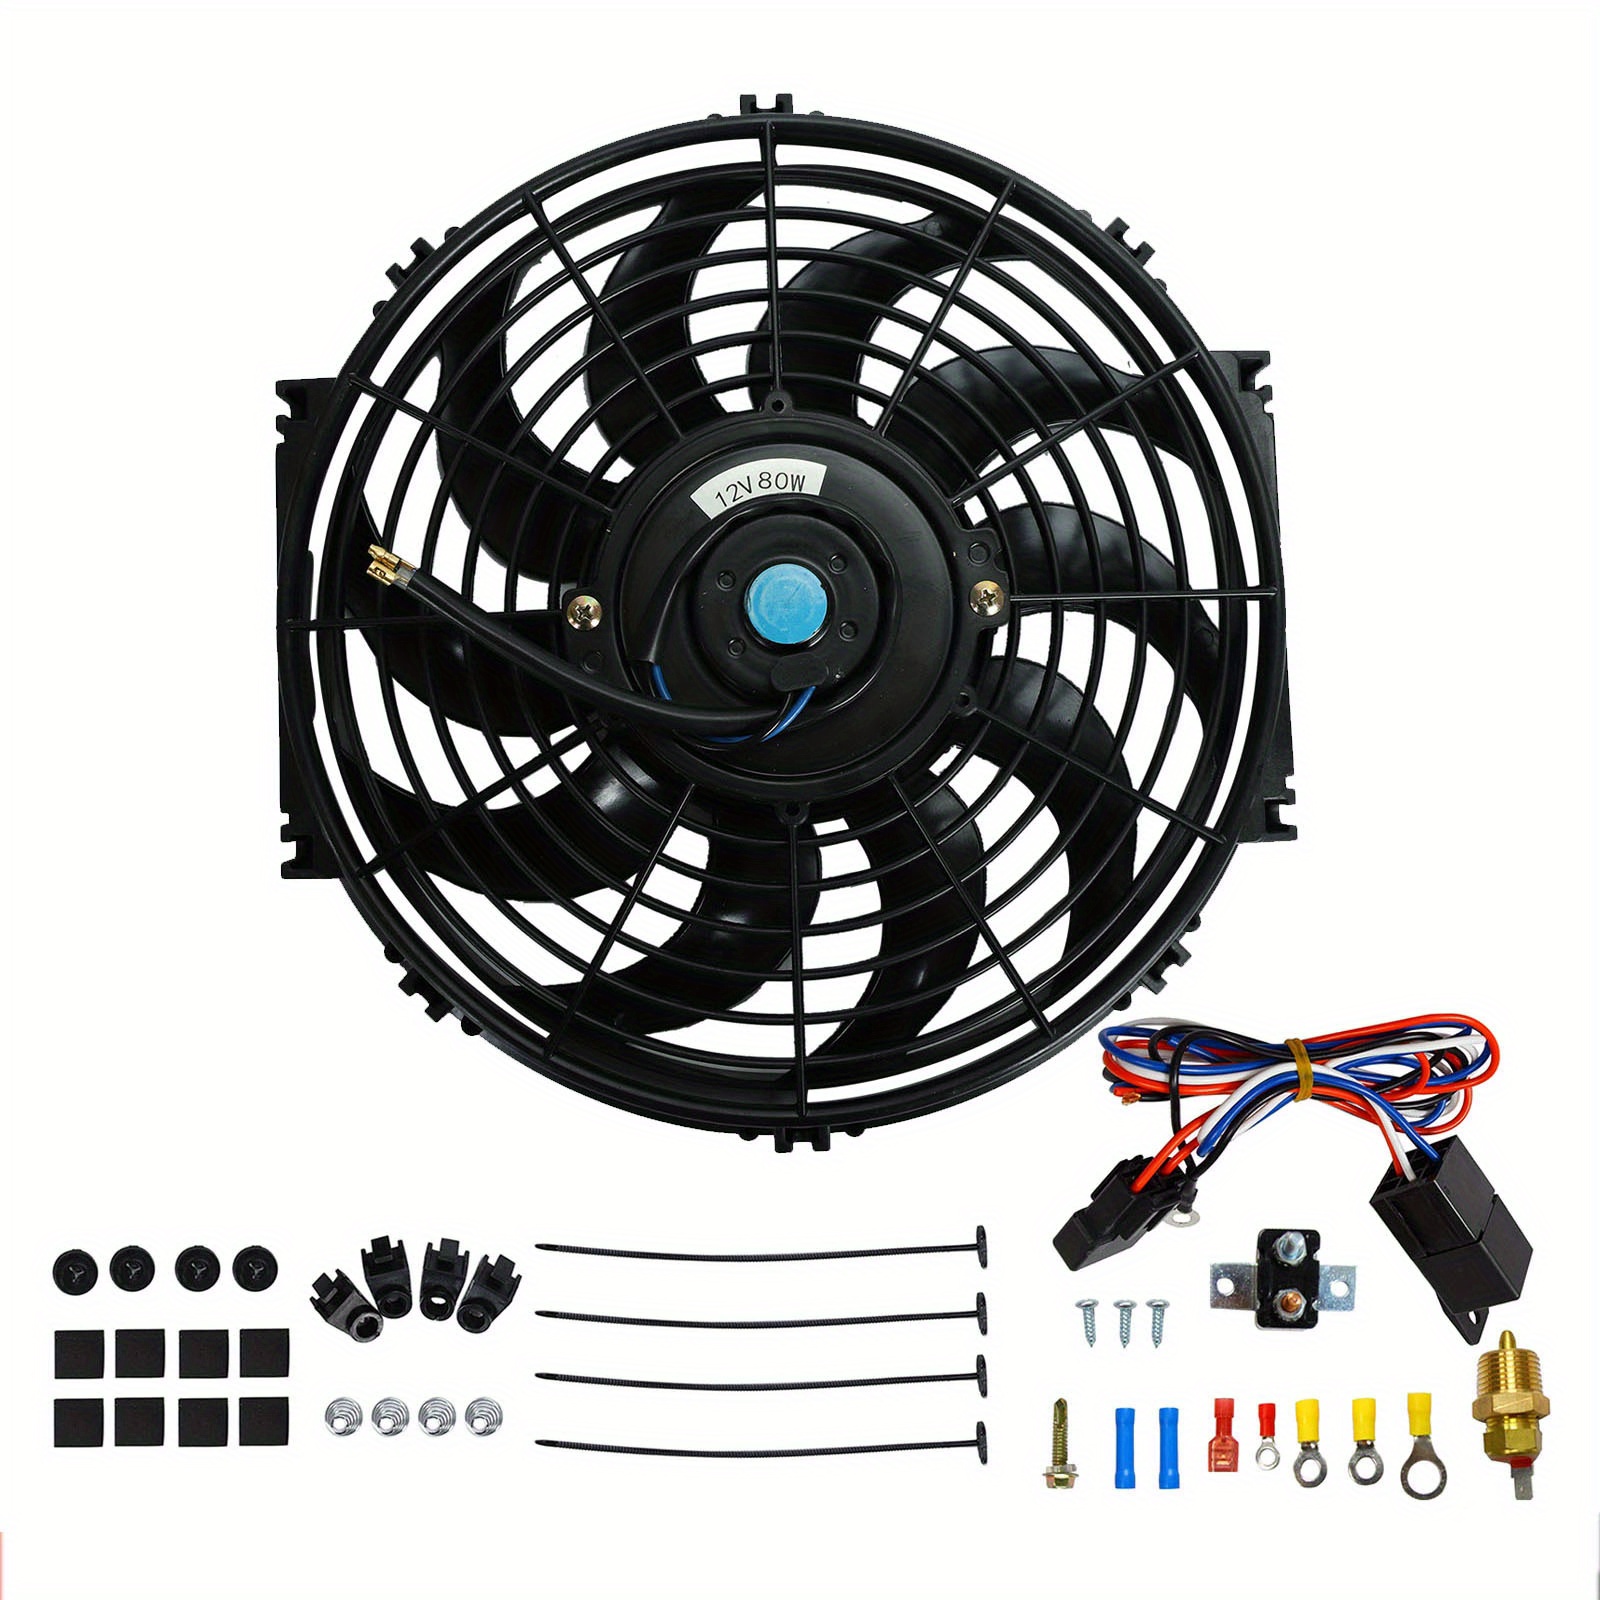 

12" Inch Electric Radiator Cooling Slim Push Pull Fan High 800 Cfm+thermostat Wiring Switch Relay Kit Universal